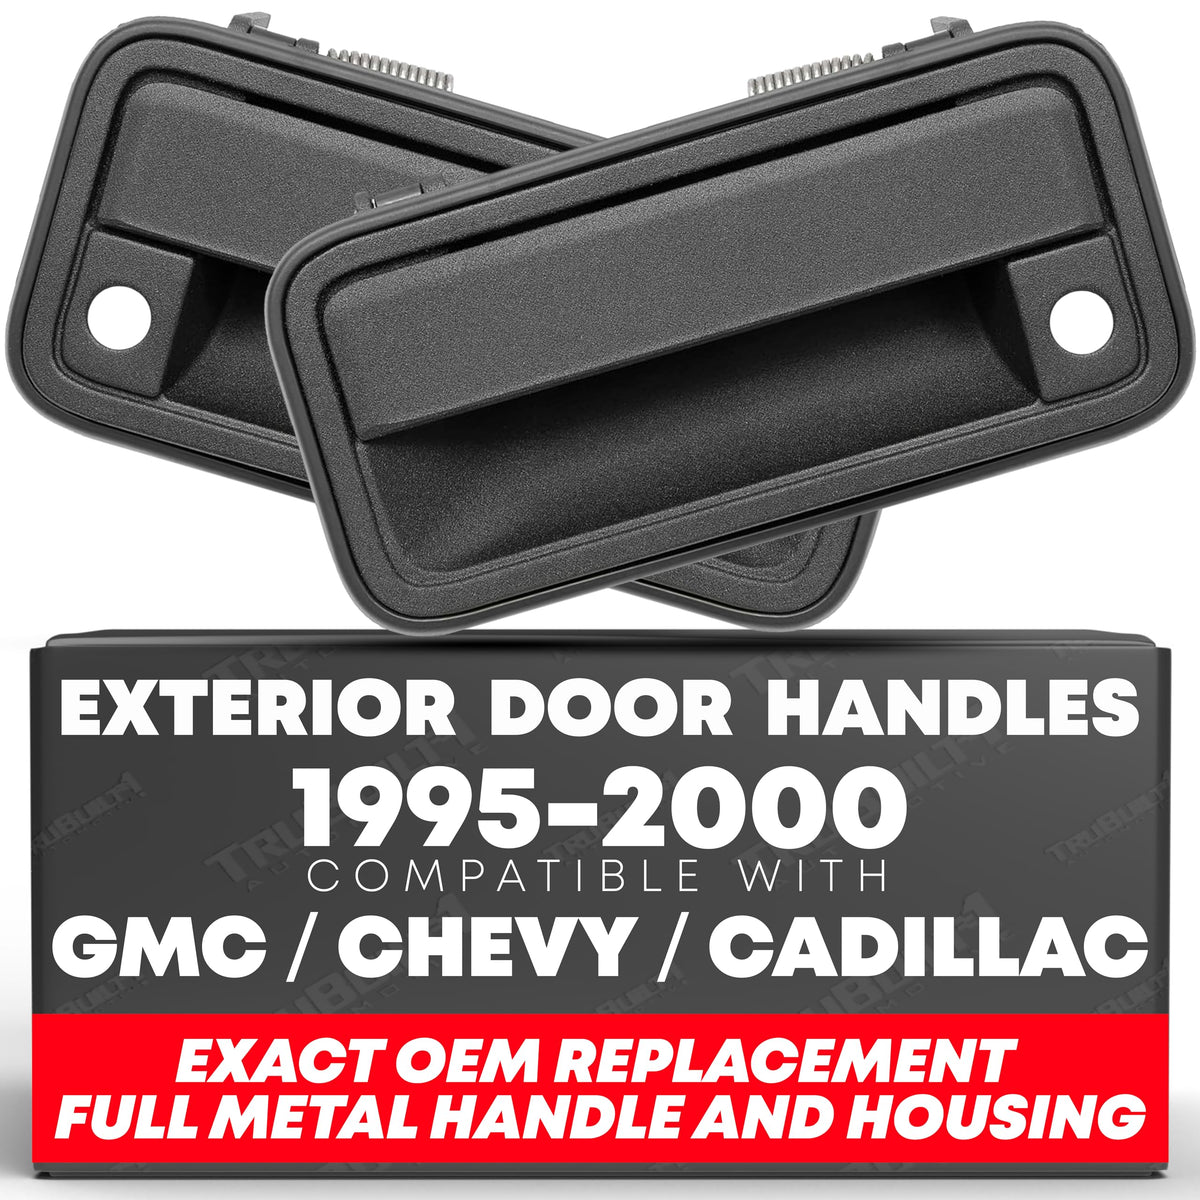 Exterior Front Right & Left Side Door Handles - ALL-Metal | Compatible with 1988-2001 Chevy K1500 K2500 K3500 C1500 C2500 C3500, GMC C/K 1500 2500 3500 Pickup, Suburban, Tahoe, Yukon, Cadillac